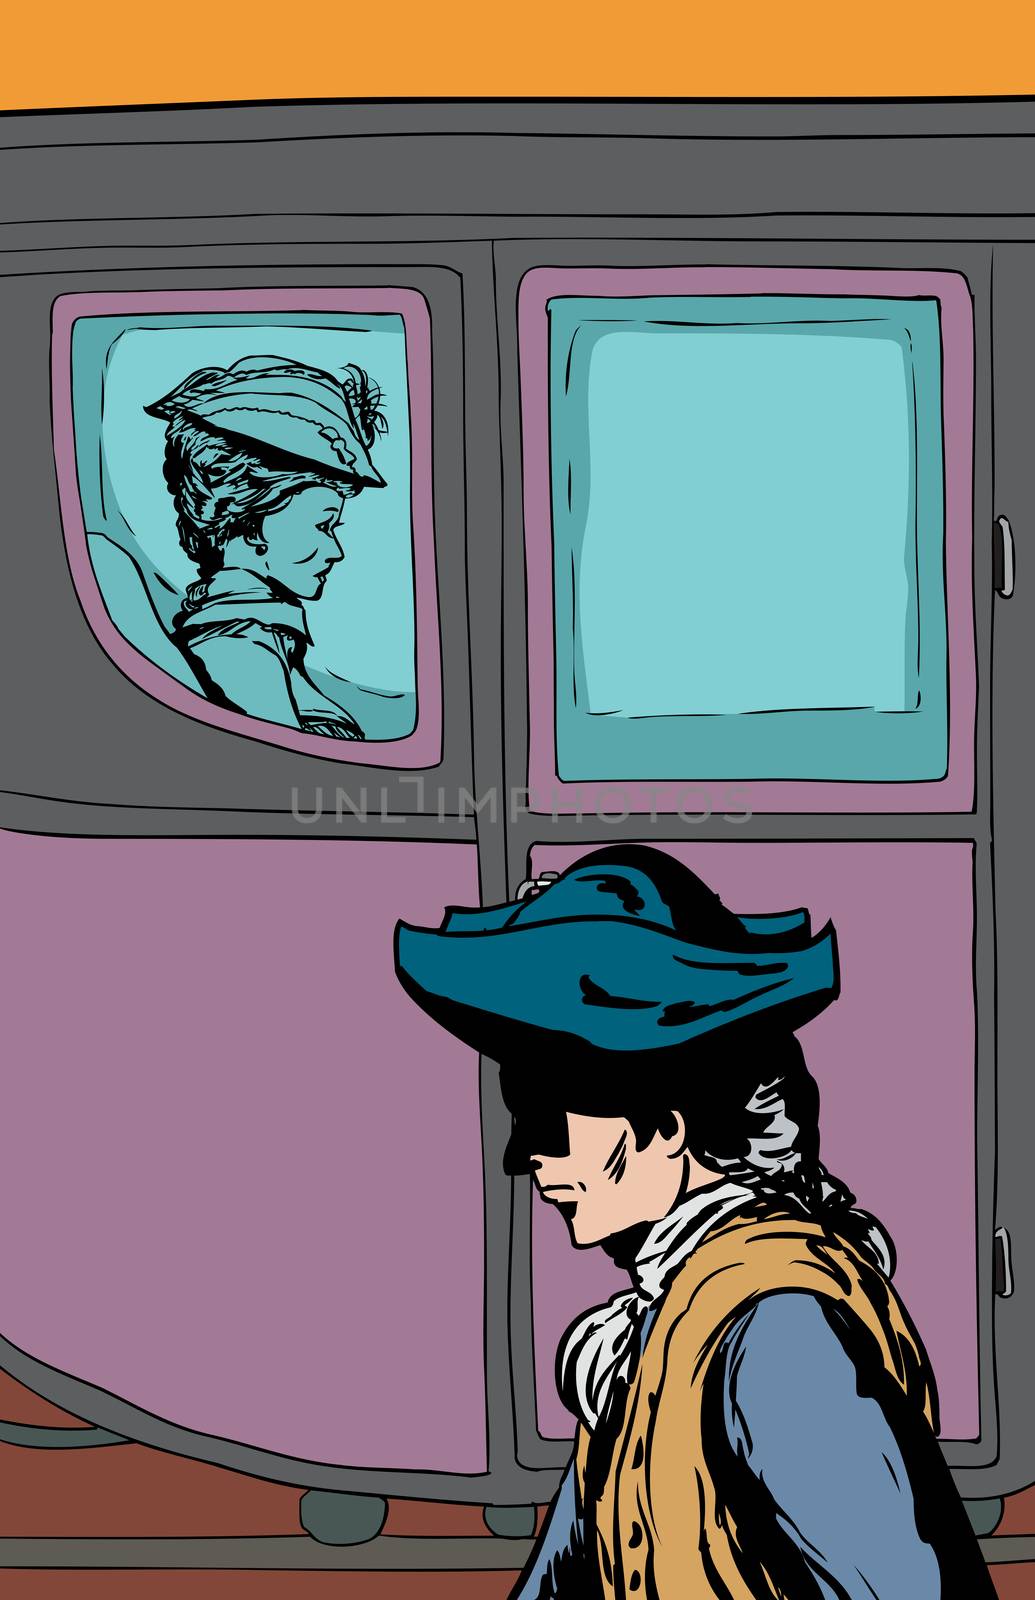 Man walking past rich carriage passenger by TheBlackRhino